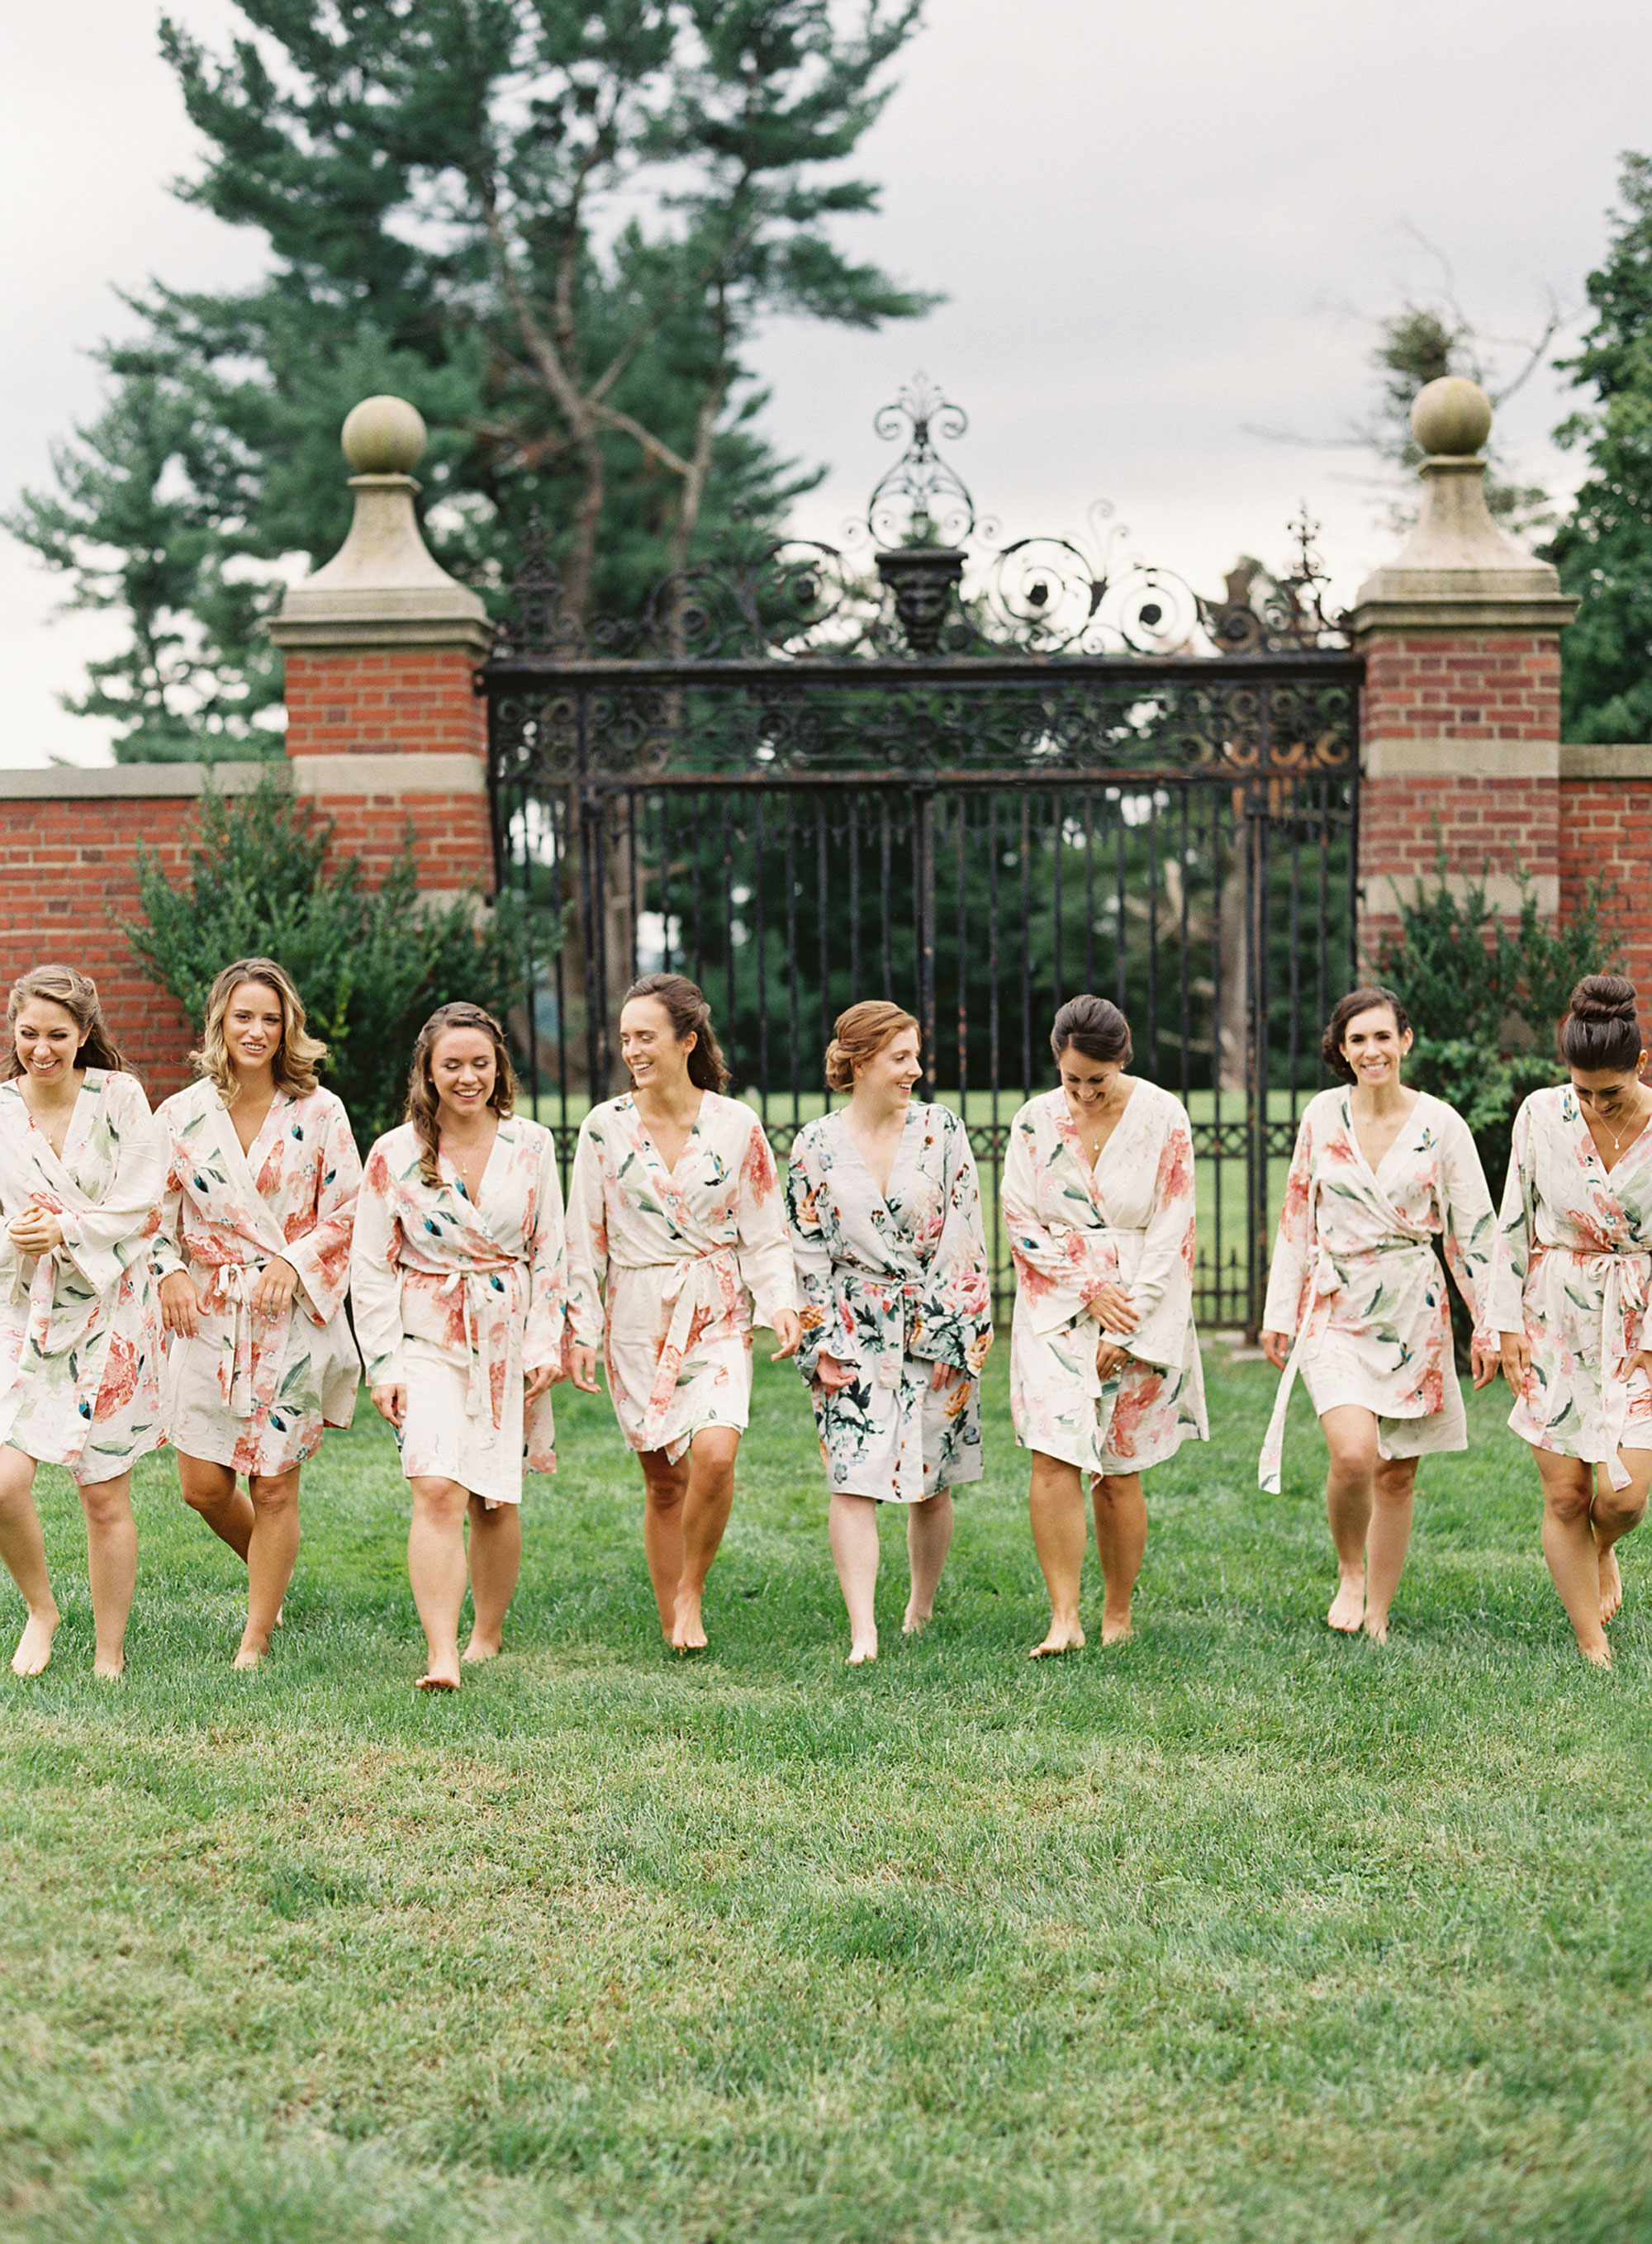 Wedding party floral robes for getting ready